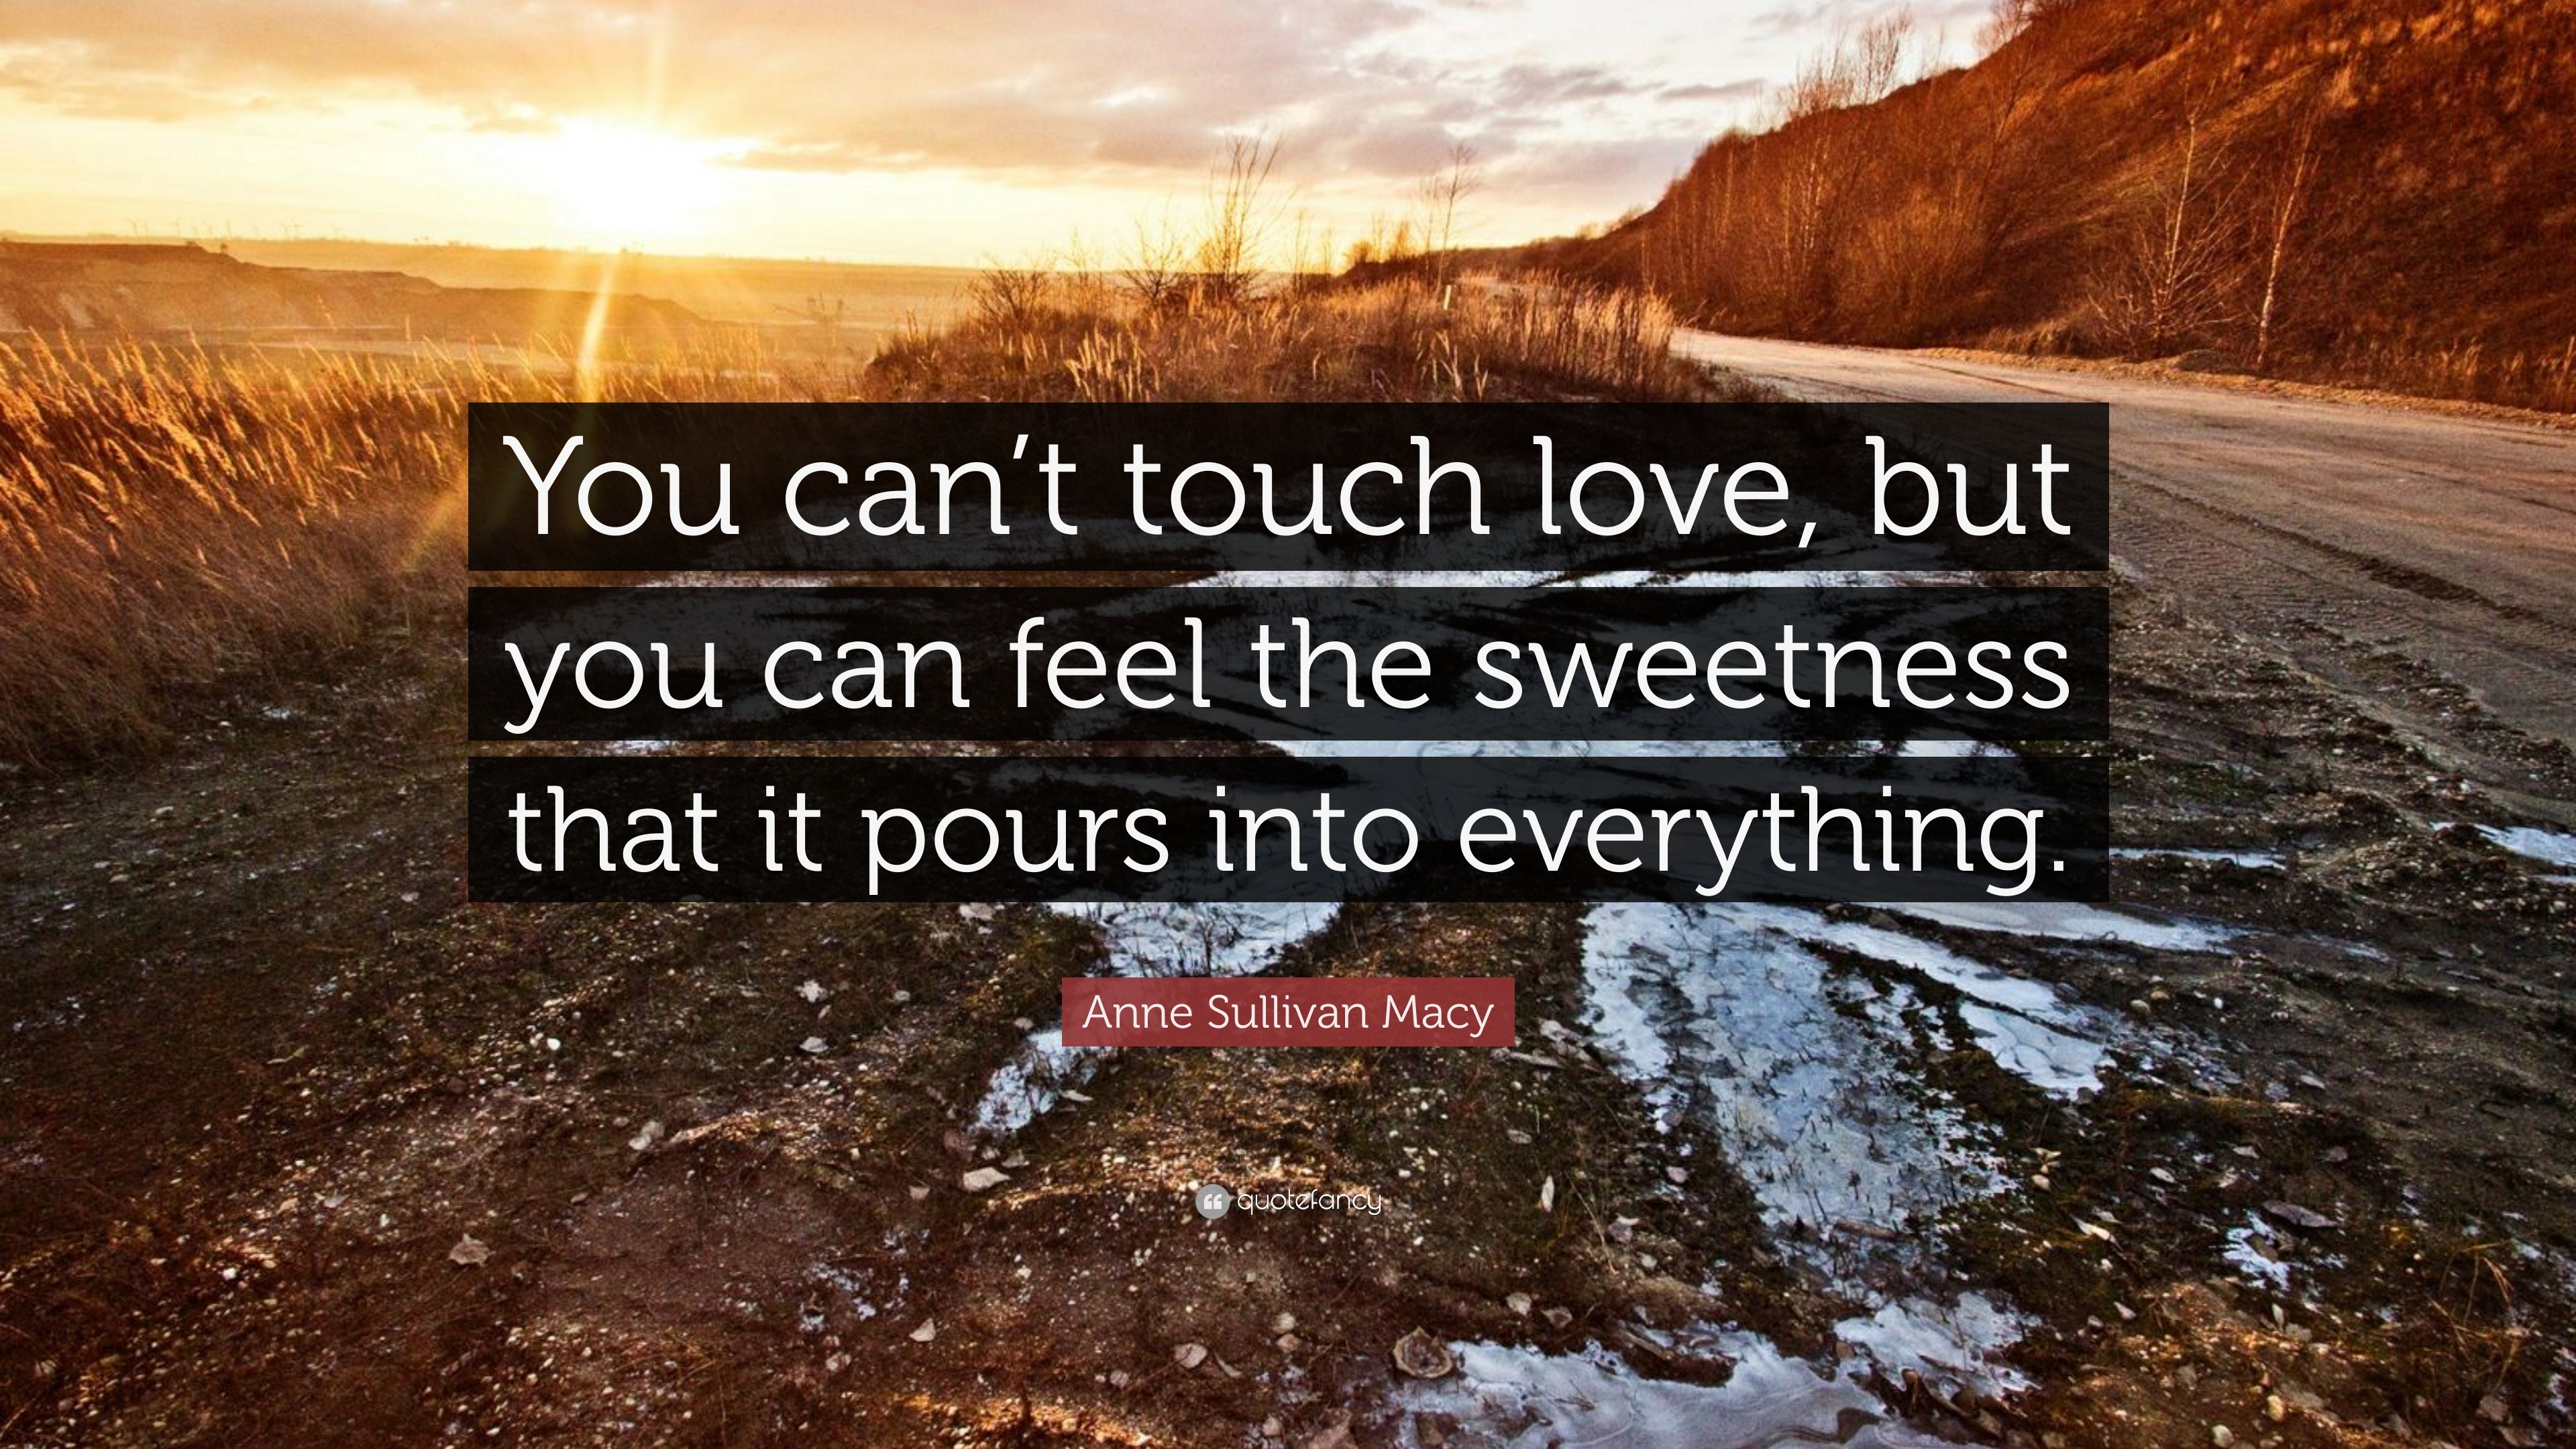 Anne Sullivan Macy Quote “You can t touch love but you can